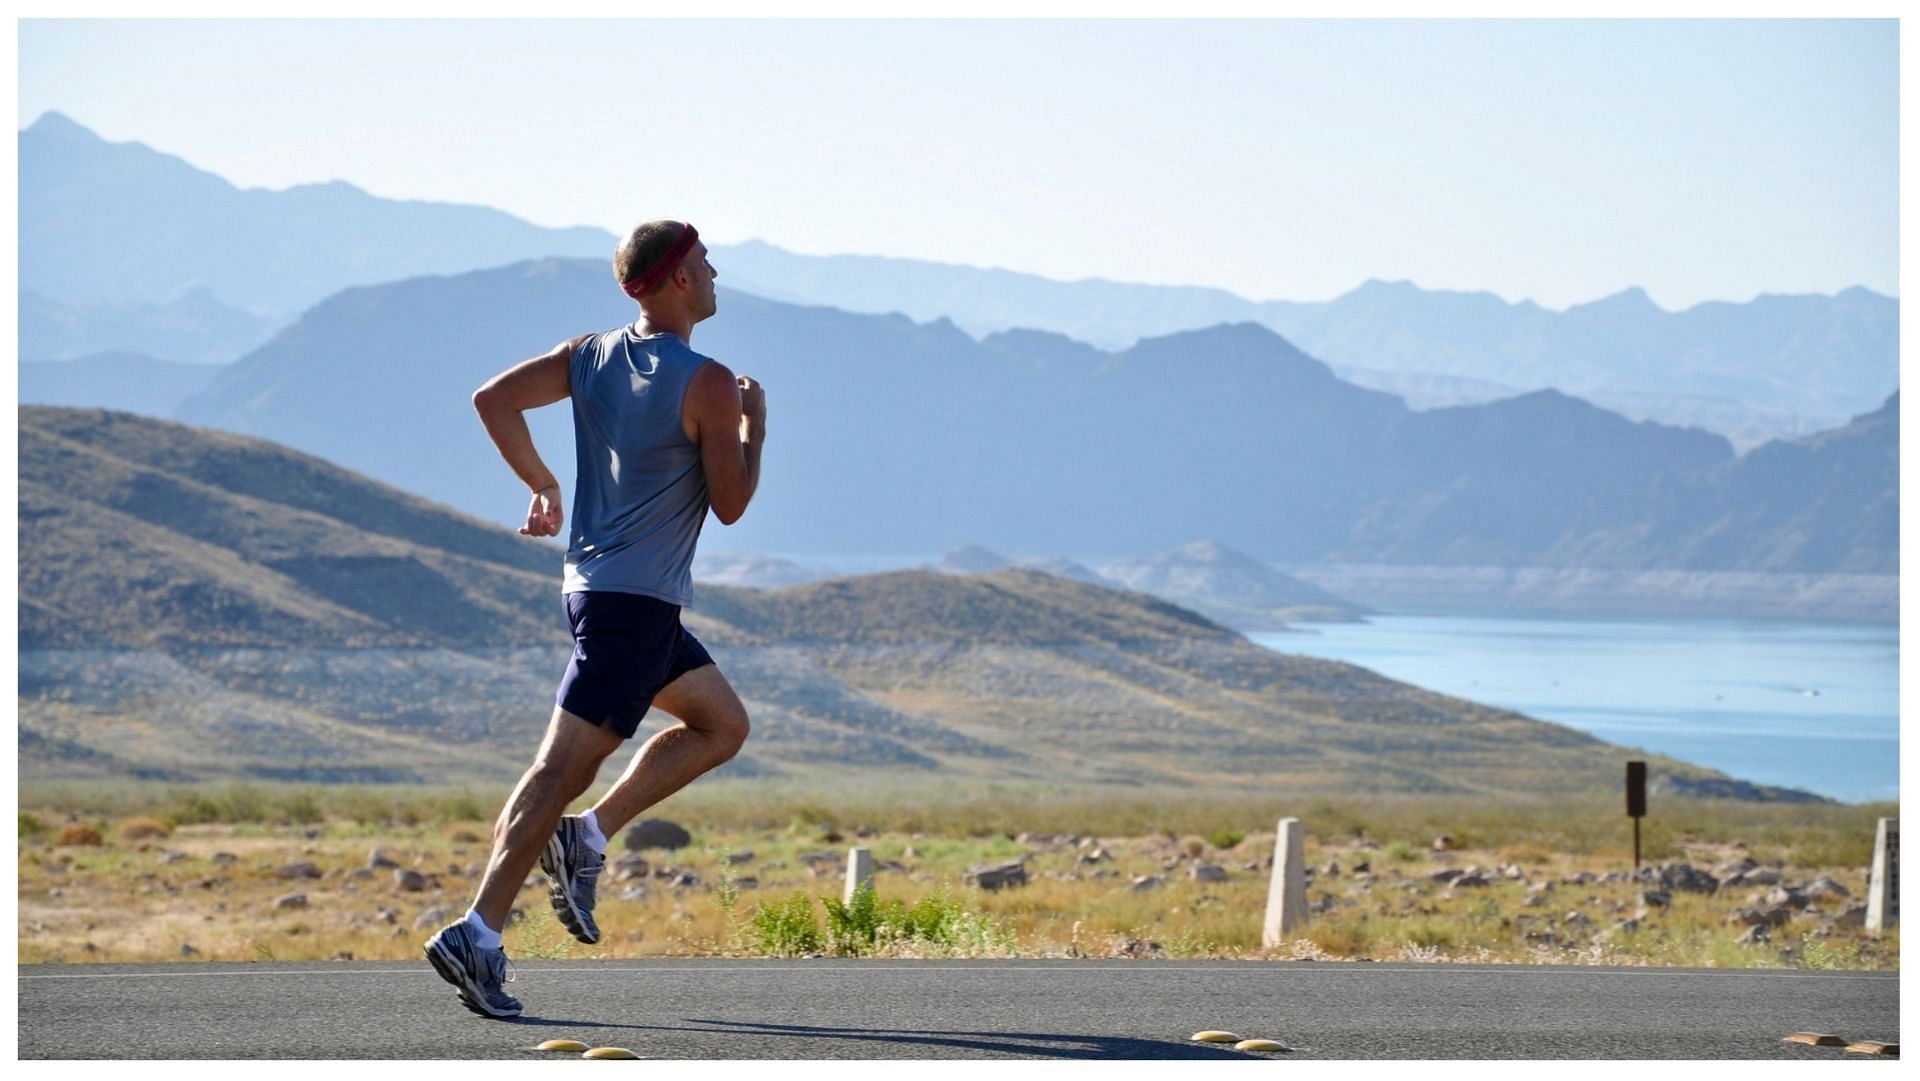 Running at a good speed can help burn more calories. (Image via www.pexels.com)